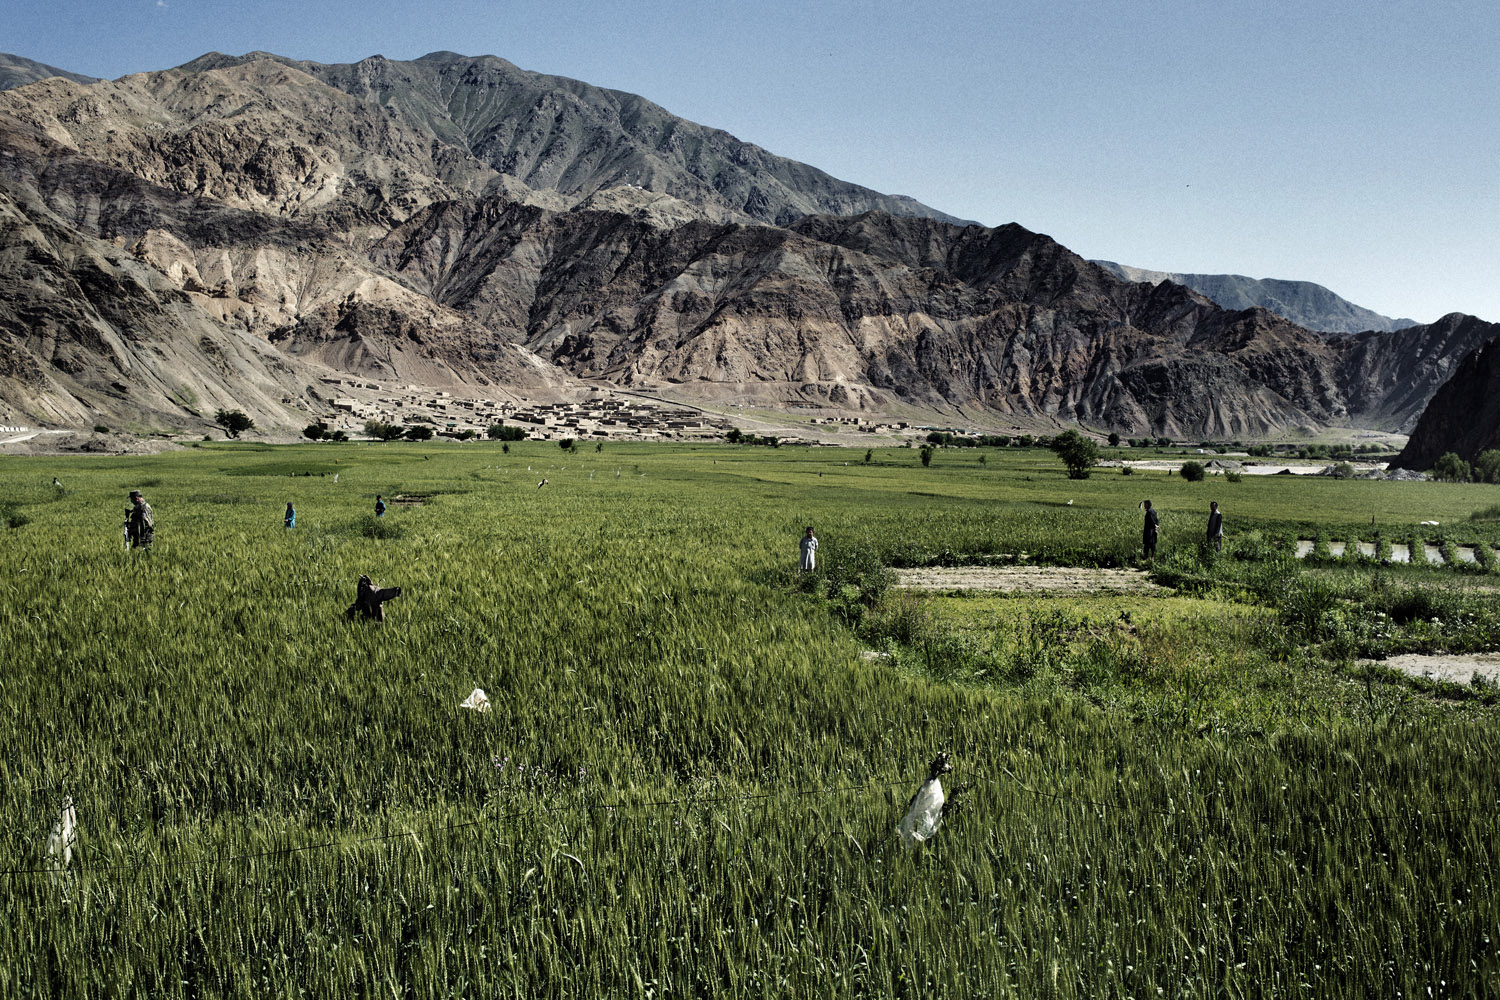 Baghlan province Afghanistan may 2013:The valley where Afghanistan Gold and Minerals is stunning — and extremely poor. Farmers say they can’t make enough money raising crops alone.